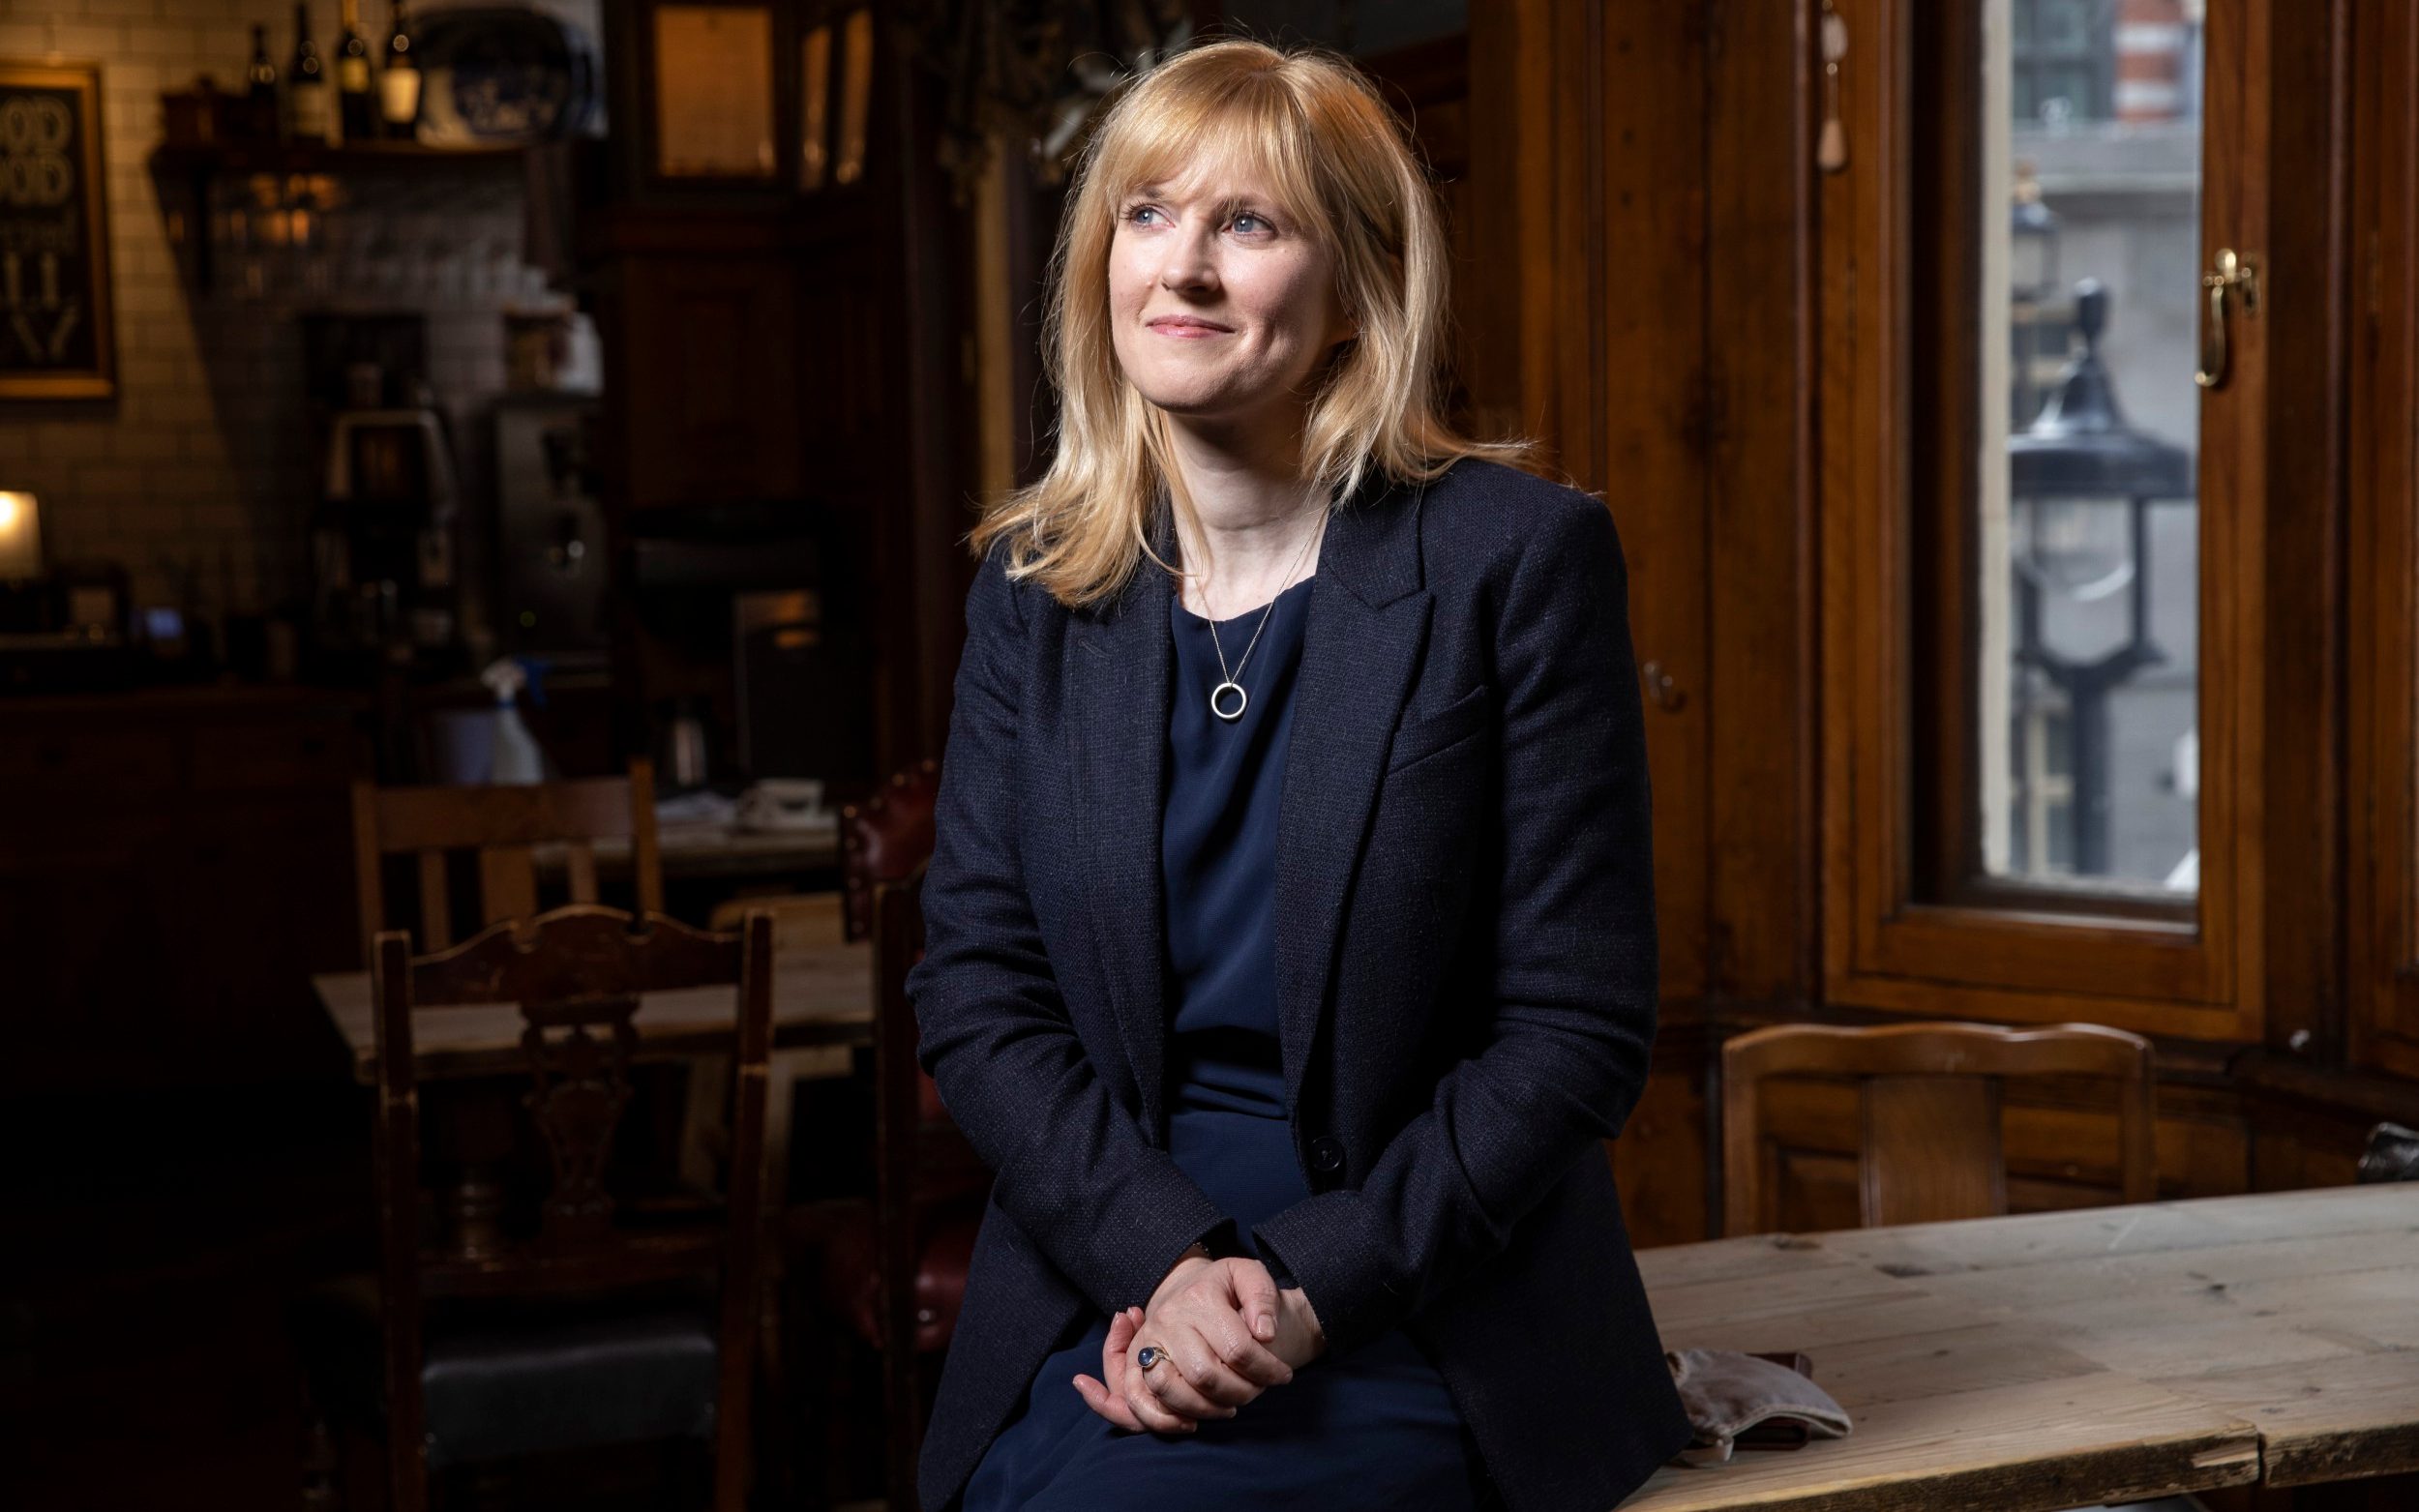 rosie duffield right to say only women have a cervix, says starmer